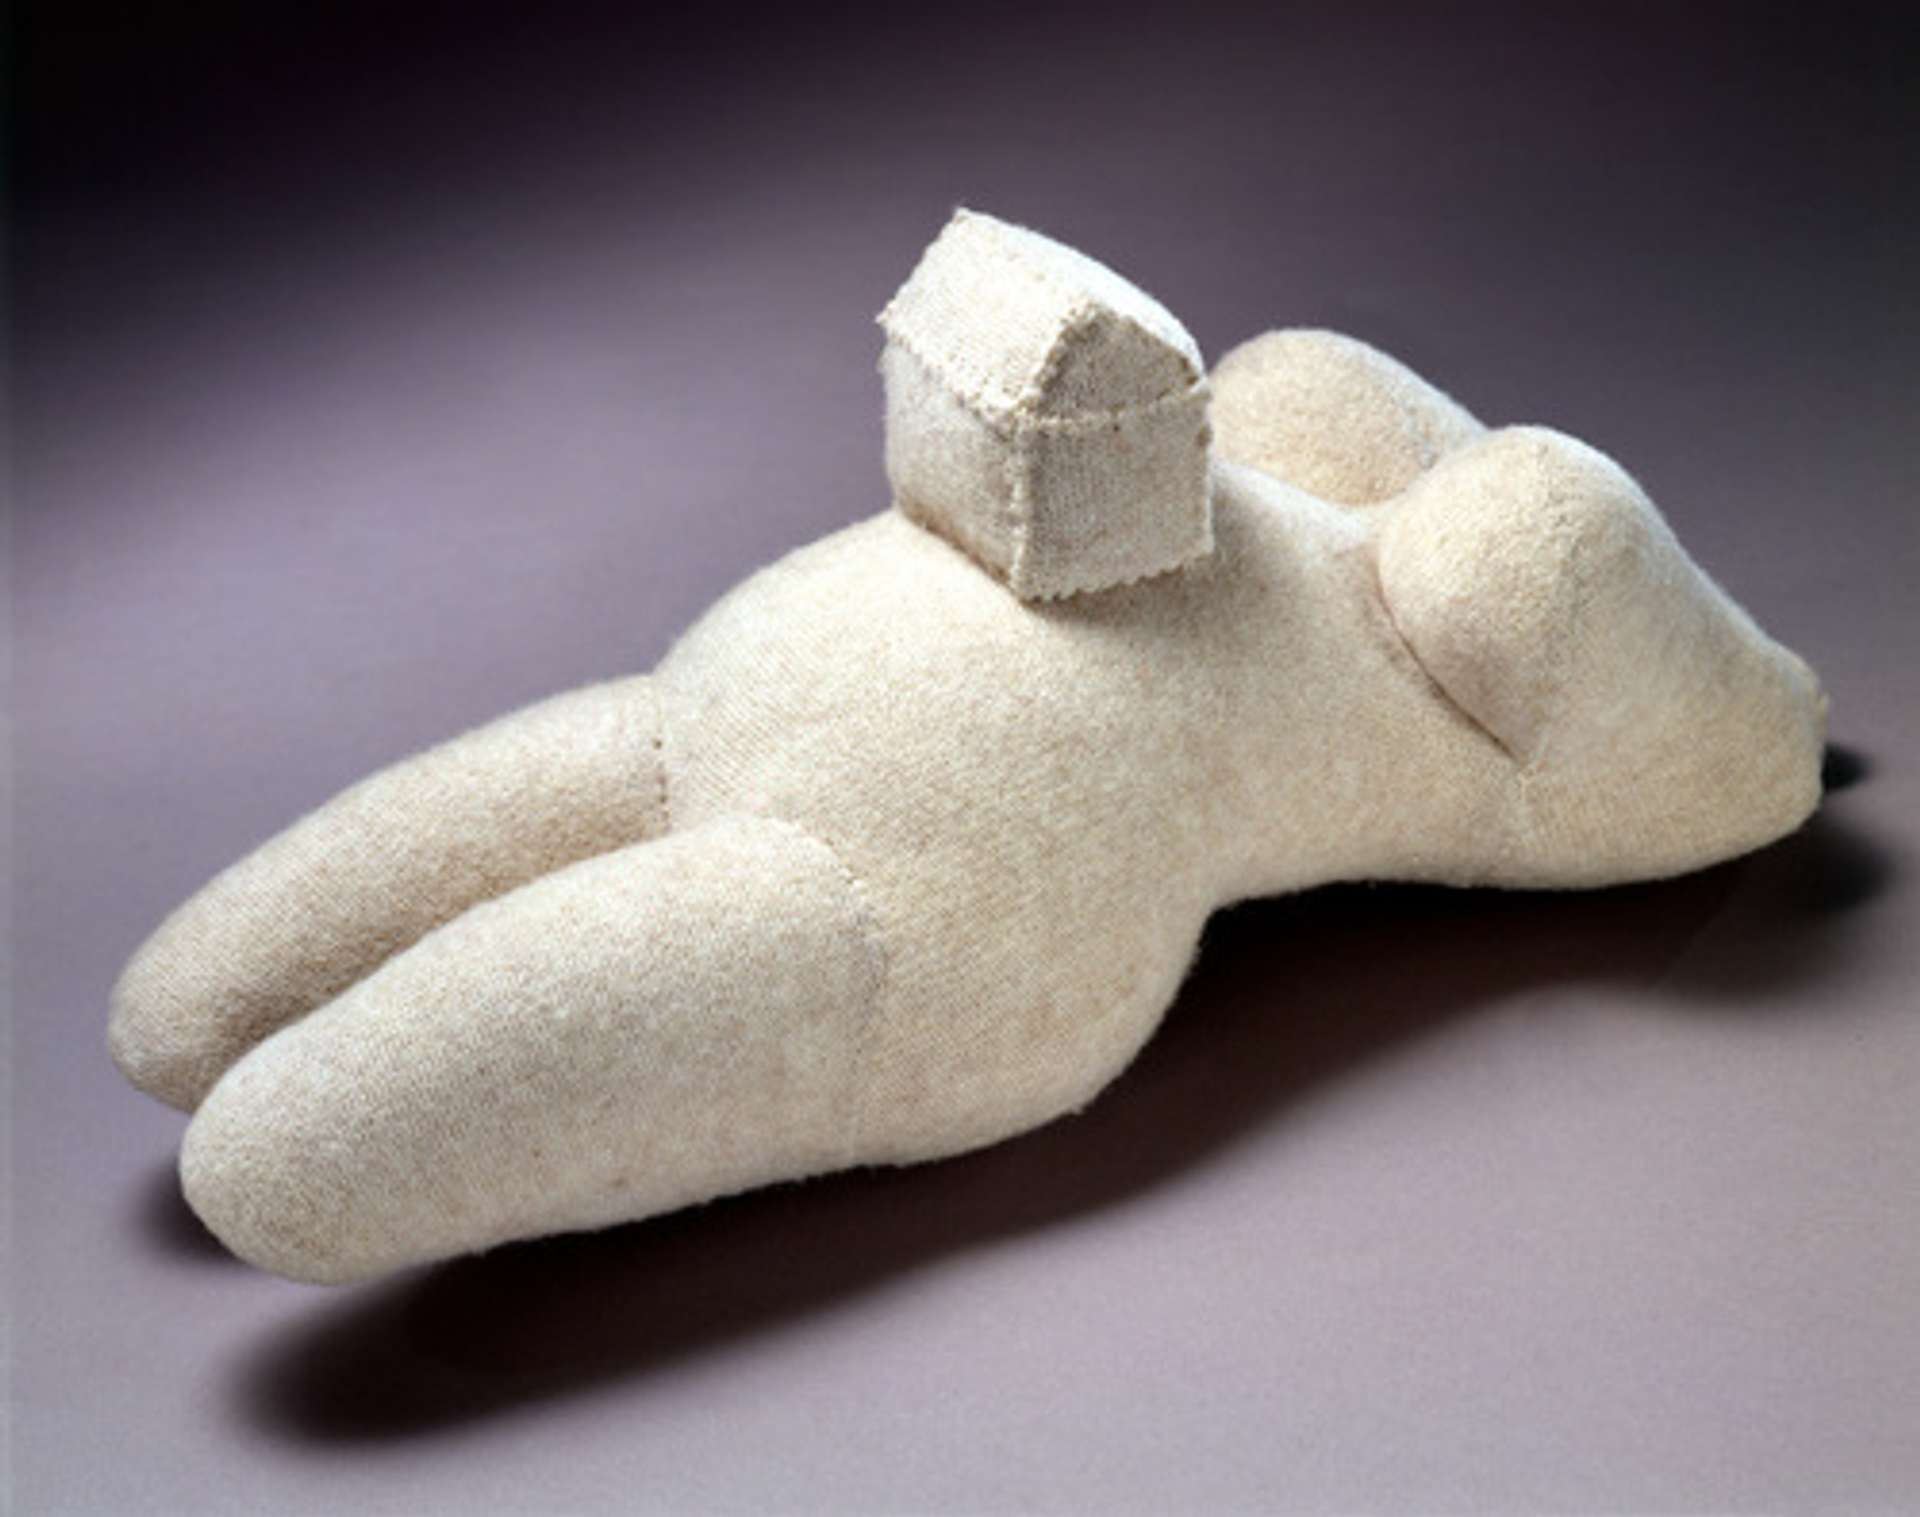 A fabric sculpture of a woman’s body from the cheesy down, with a house sitting on her stomach